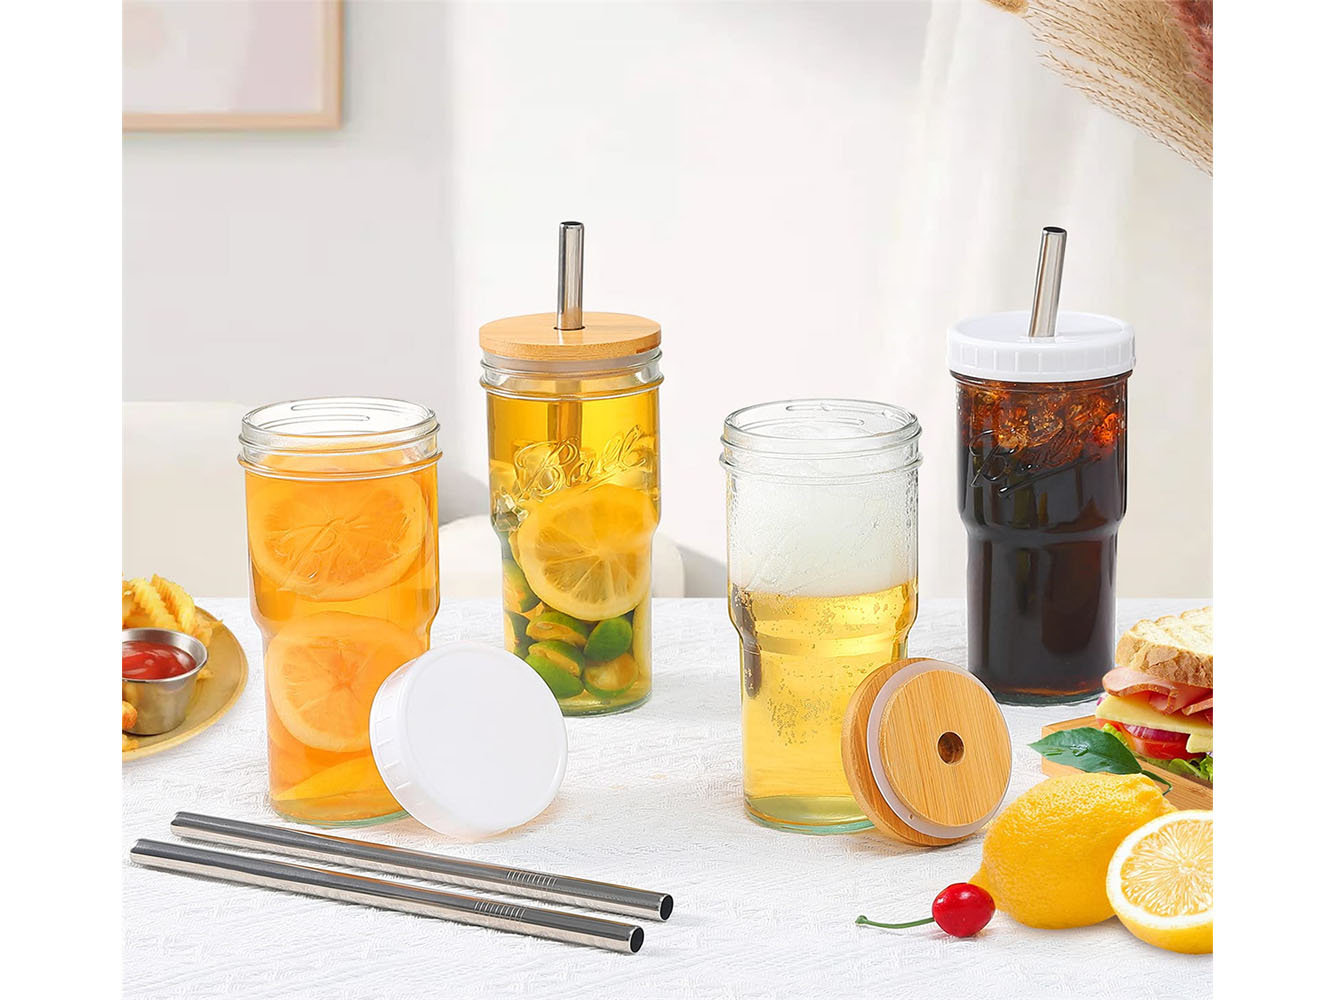 Mason Jar Sip & Straw Lids Wide Mouth (Pack of 4)